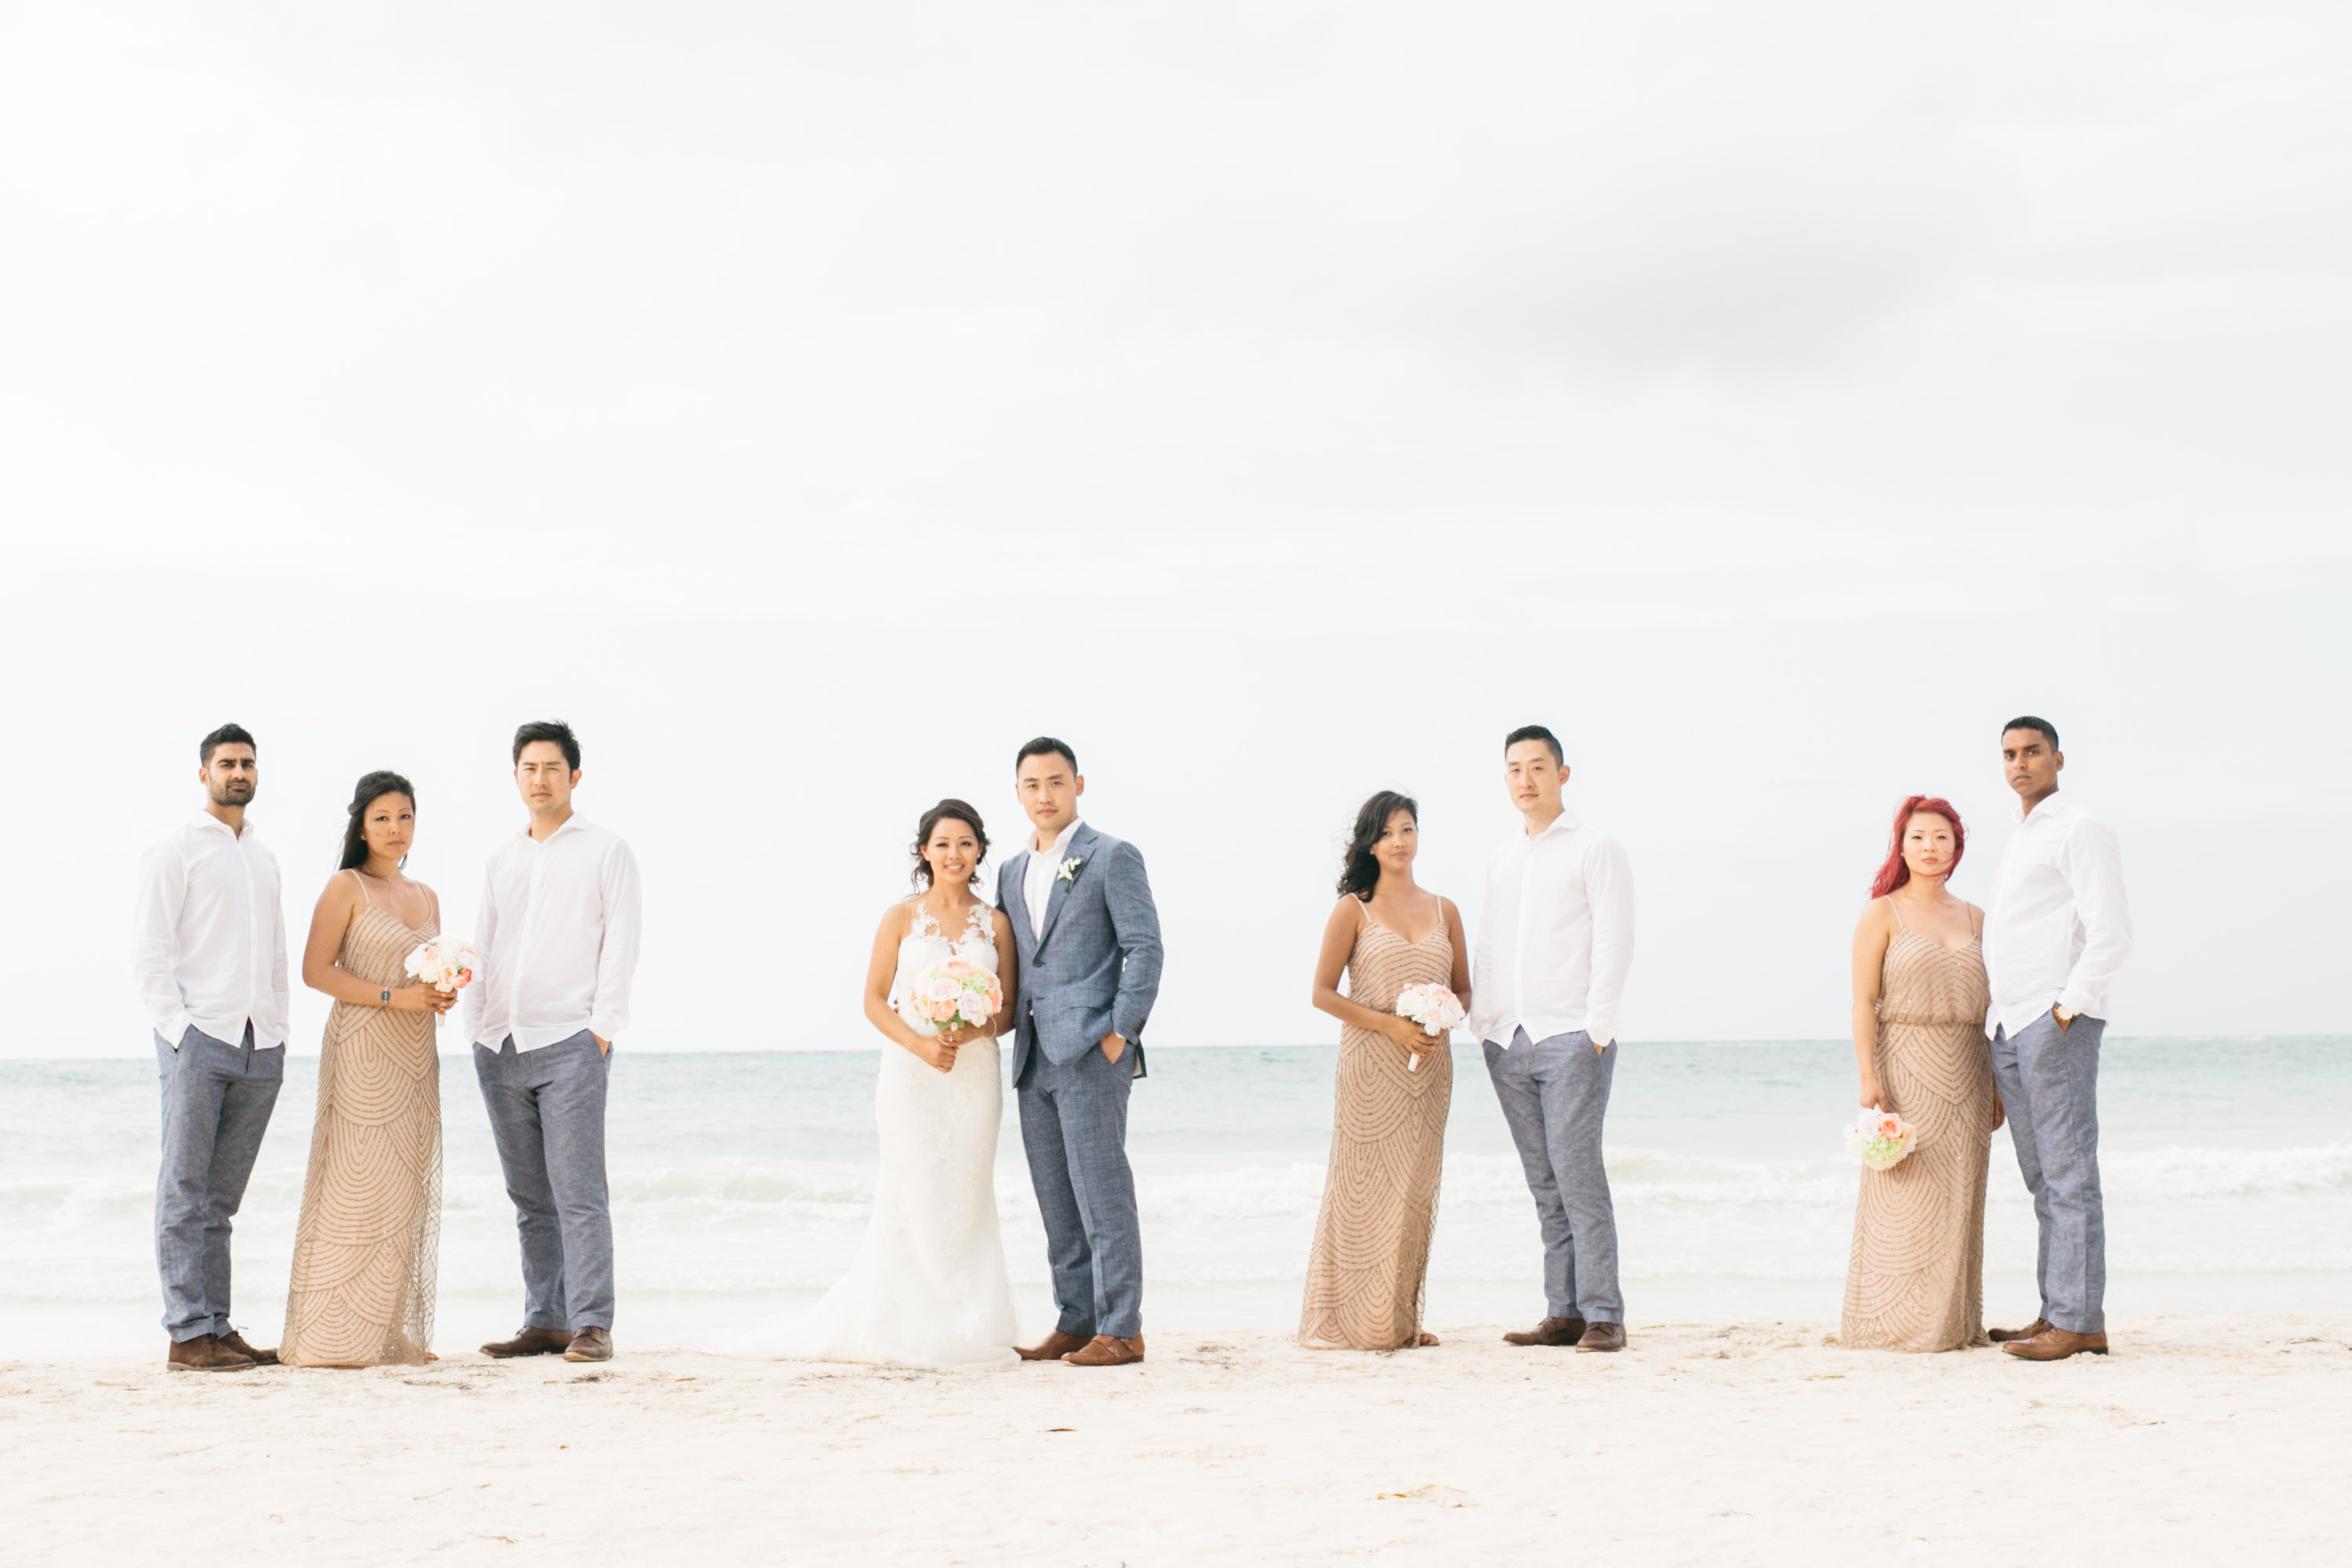 Bridal party portrait at the beach